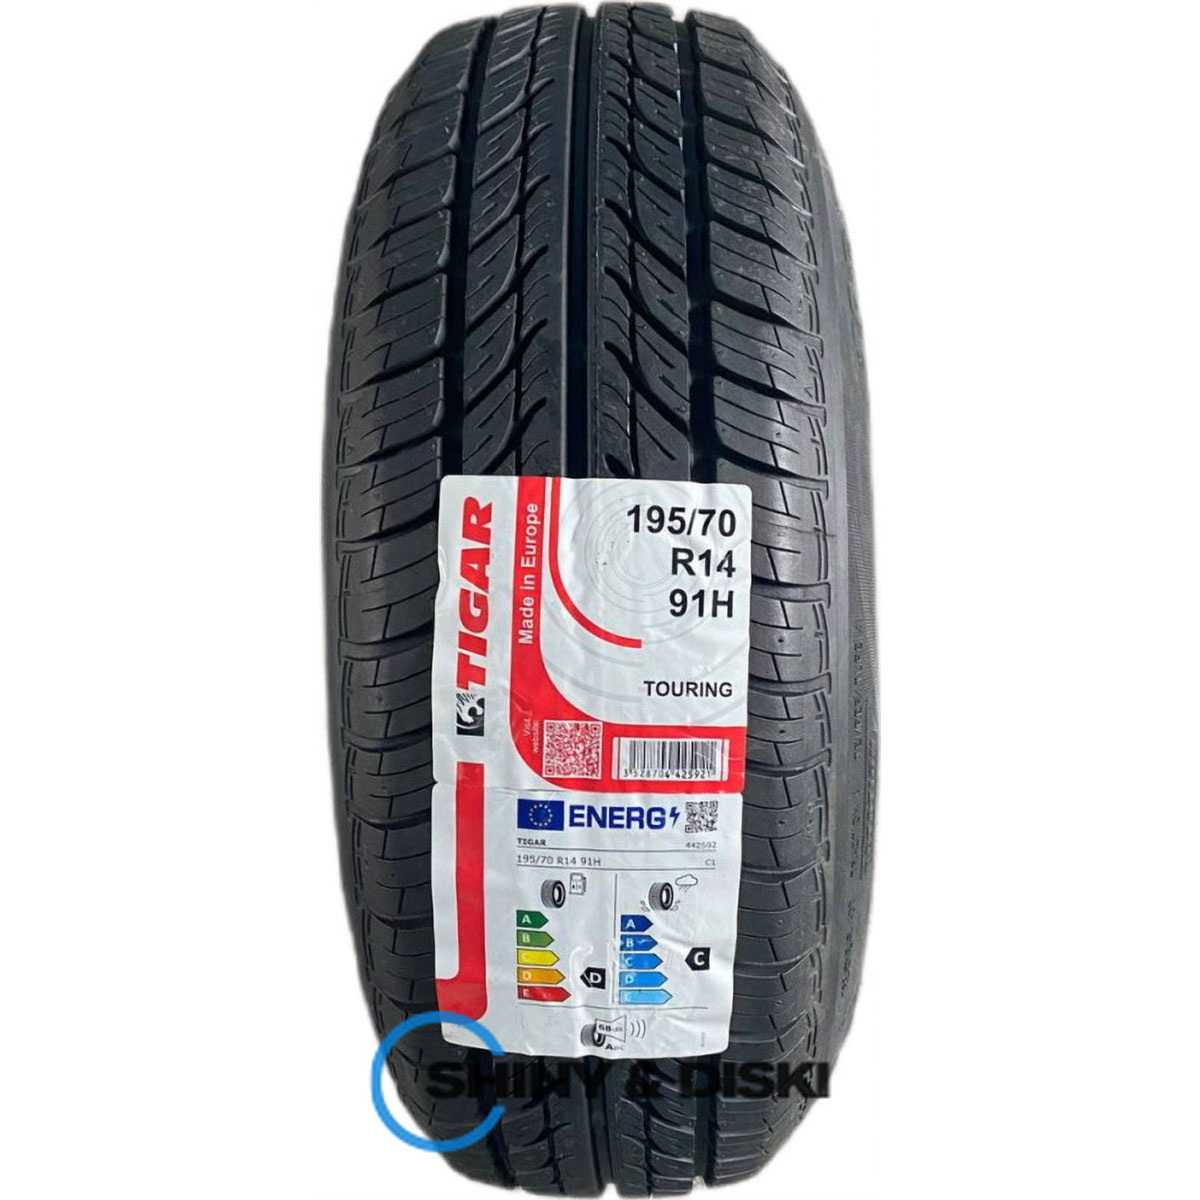 покрышки tigar touring 195/70 r14 91h